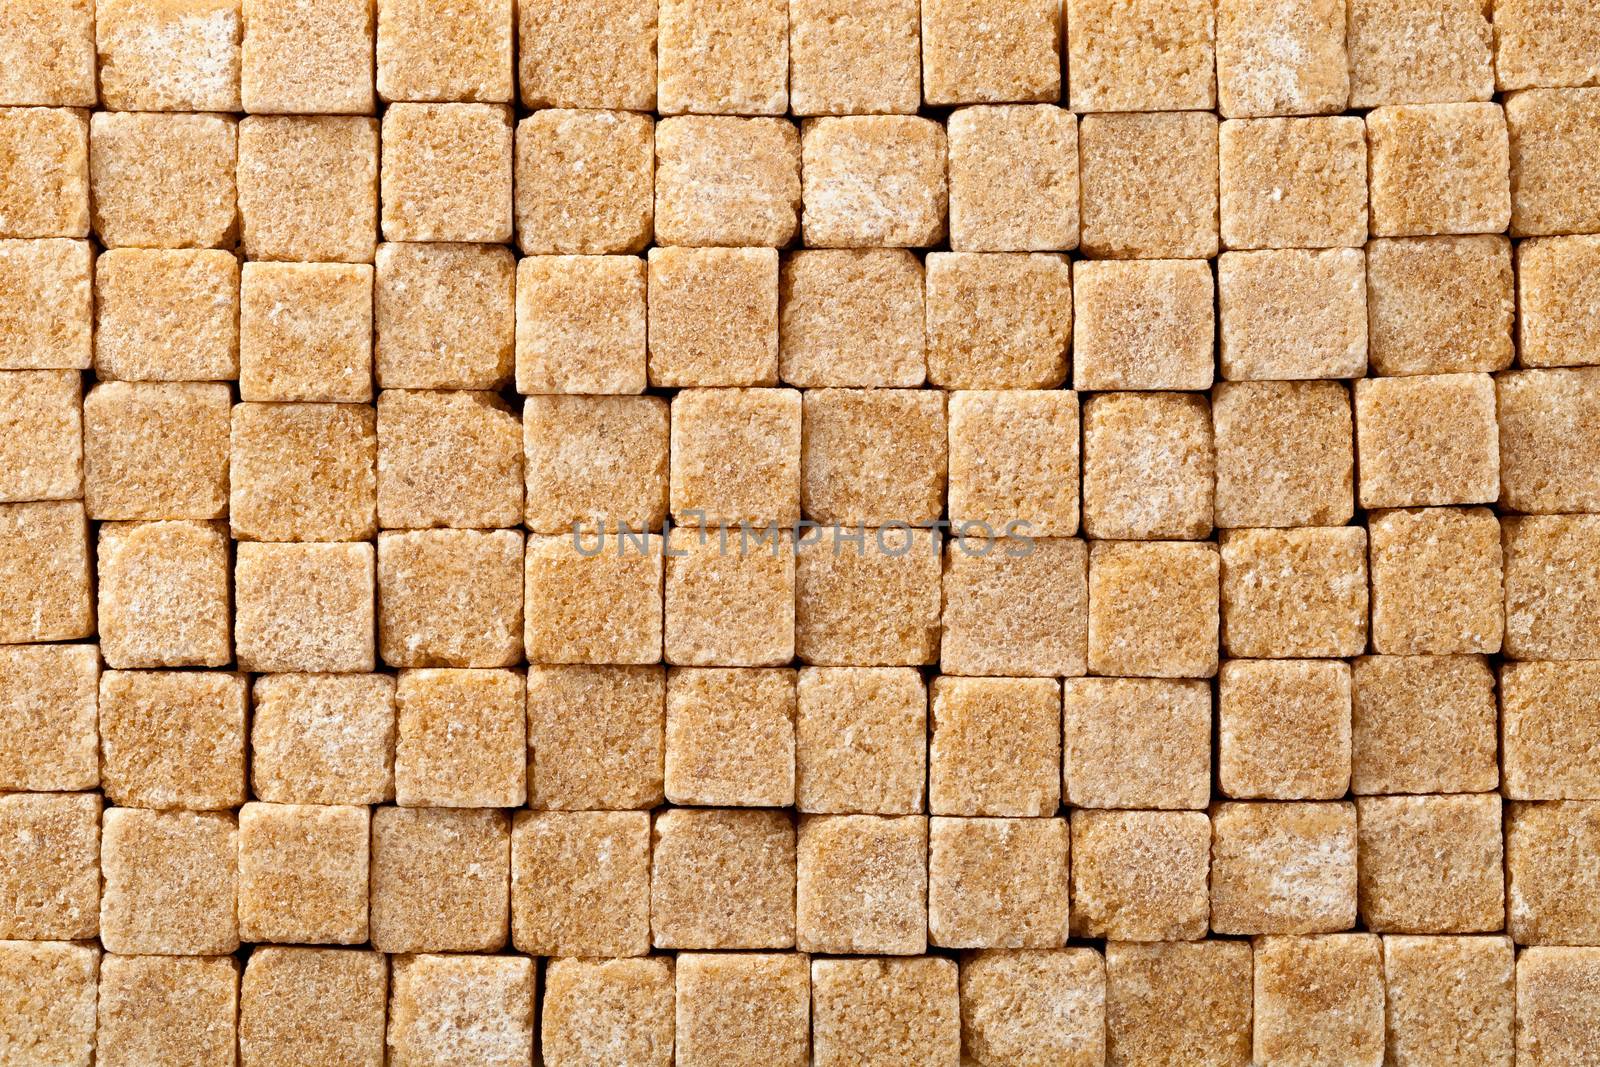 Brown sugar cubes for background. Top view